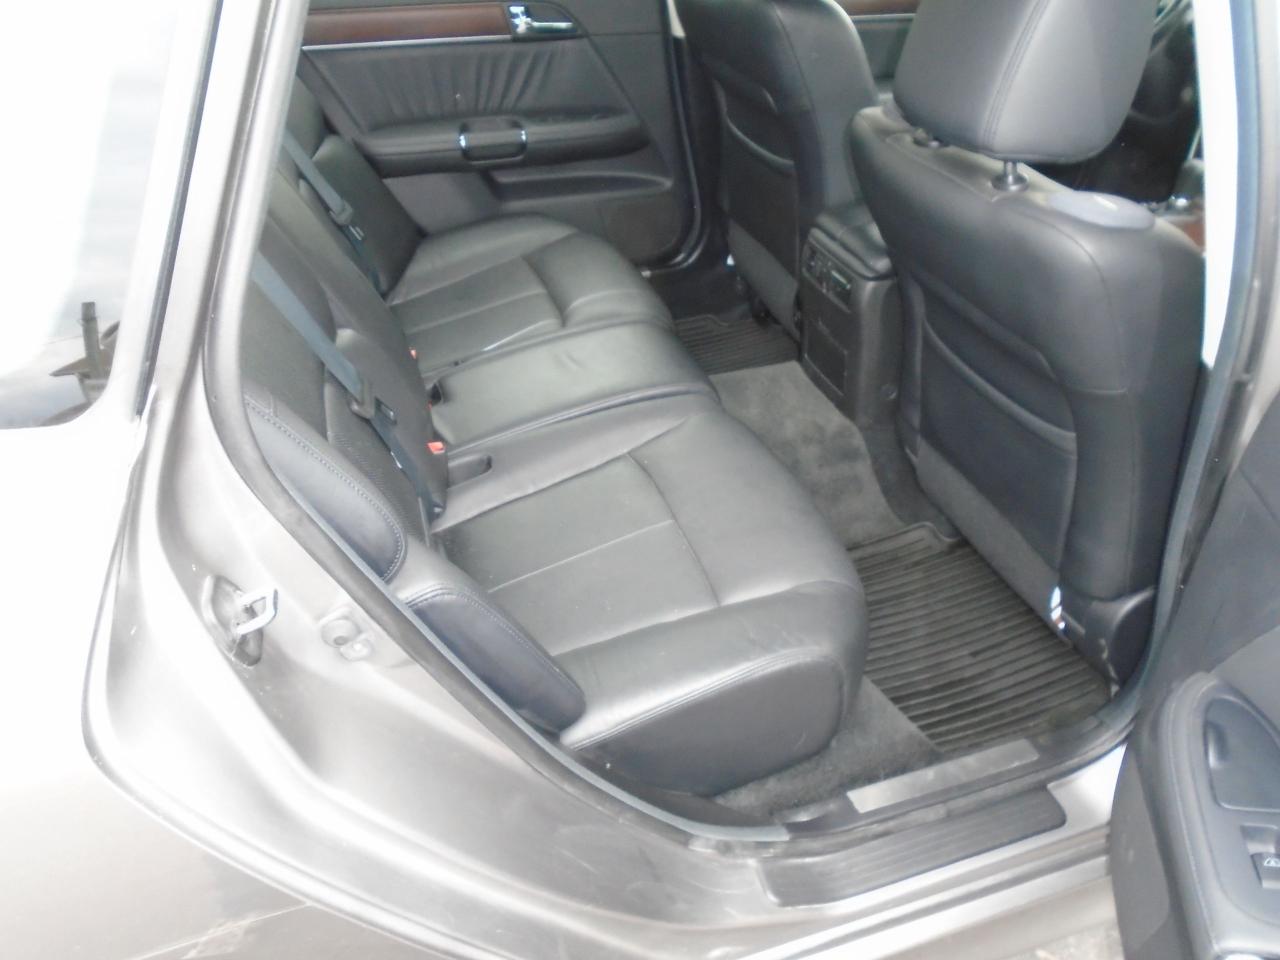 2008 Infiniti M35x Luxury Available in Sutton 905-722-8650 - Photo #10